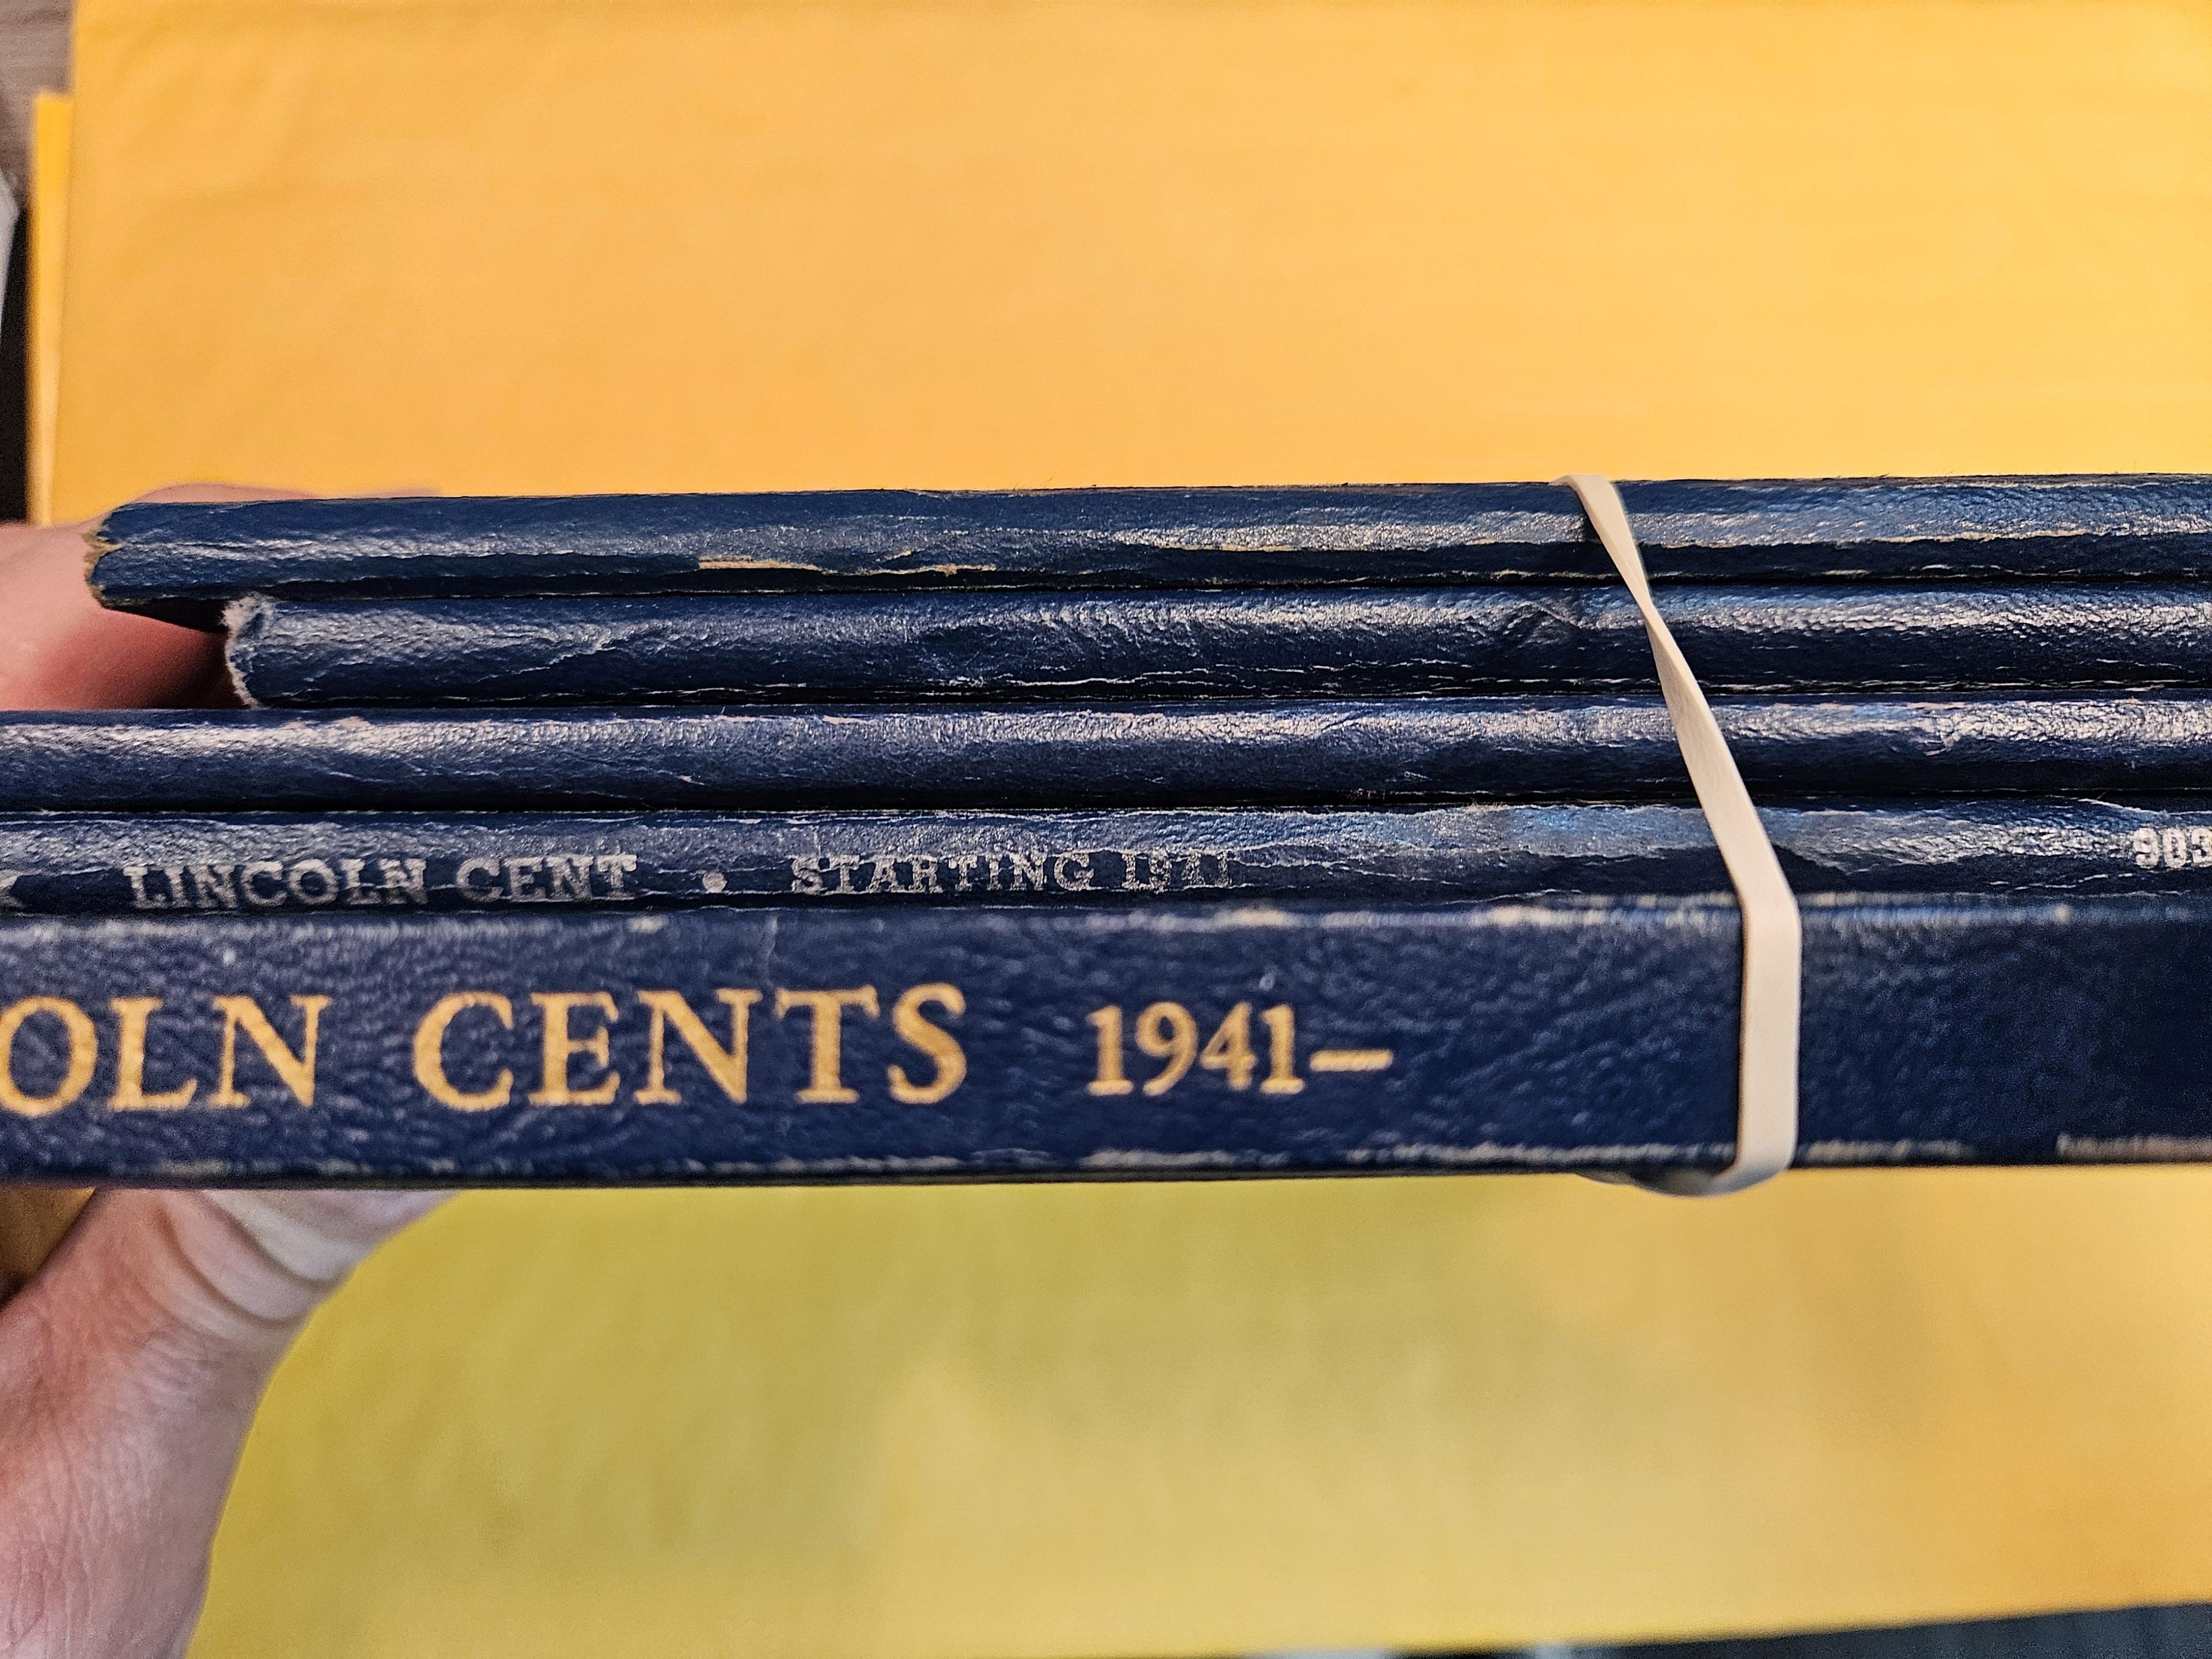 Five full to mostly full Lincoln Cent Albums